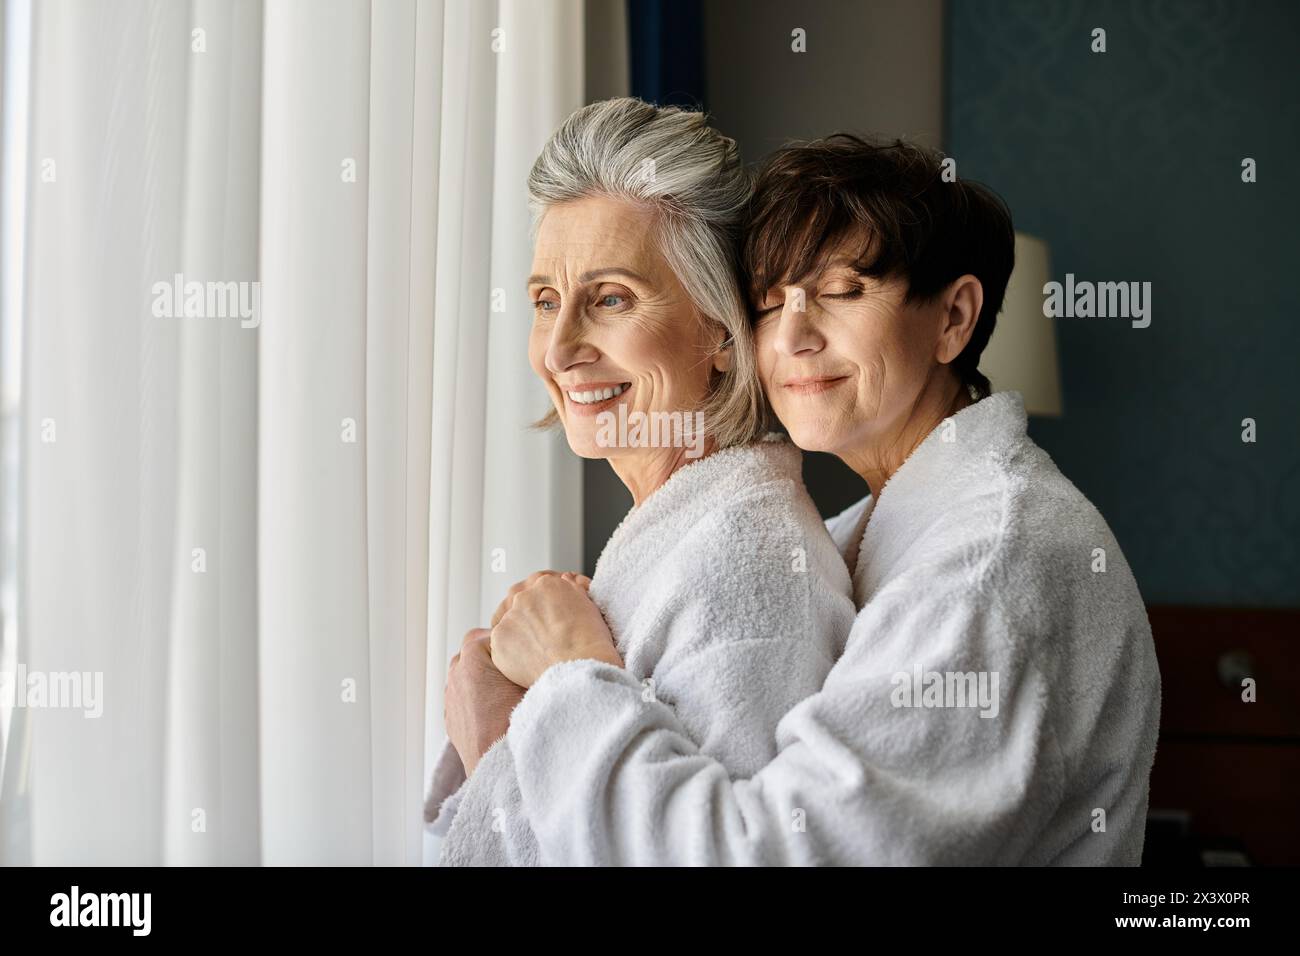 Senior lesbian couple embrace warmly in a hotel room. Stock Photo